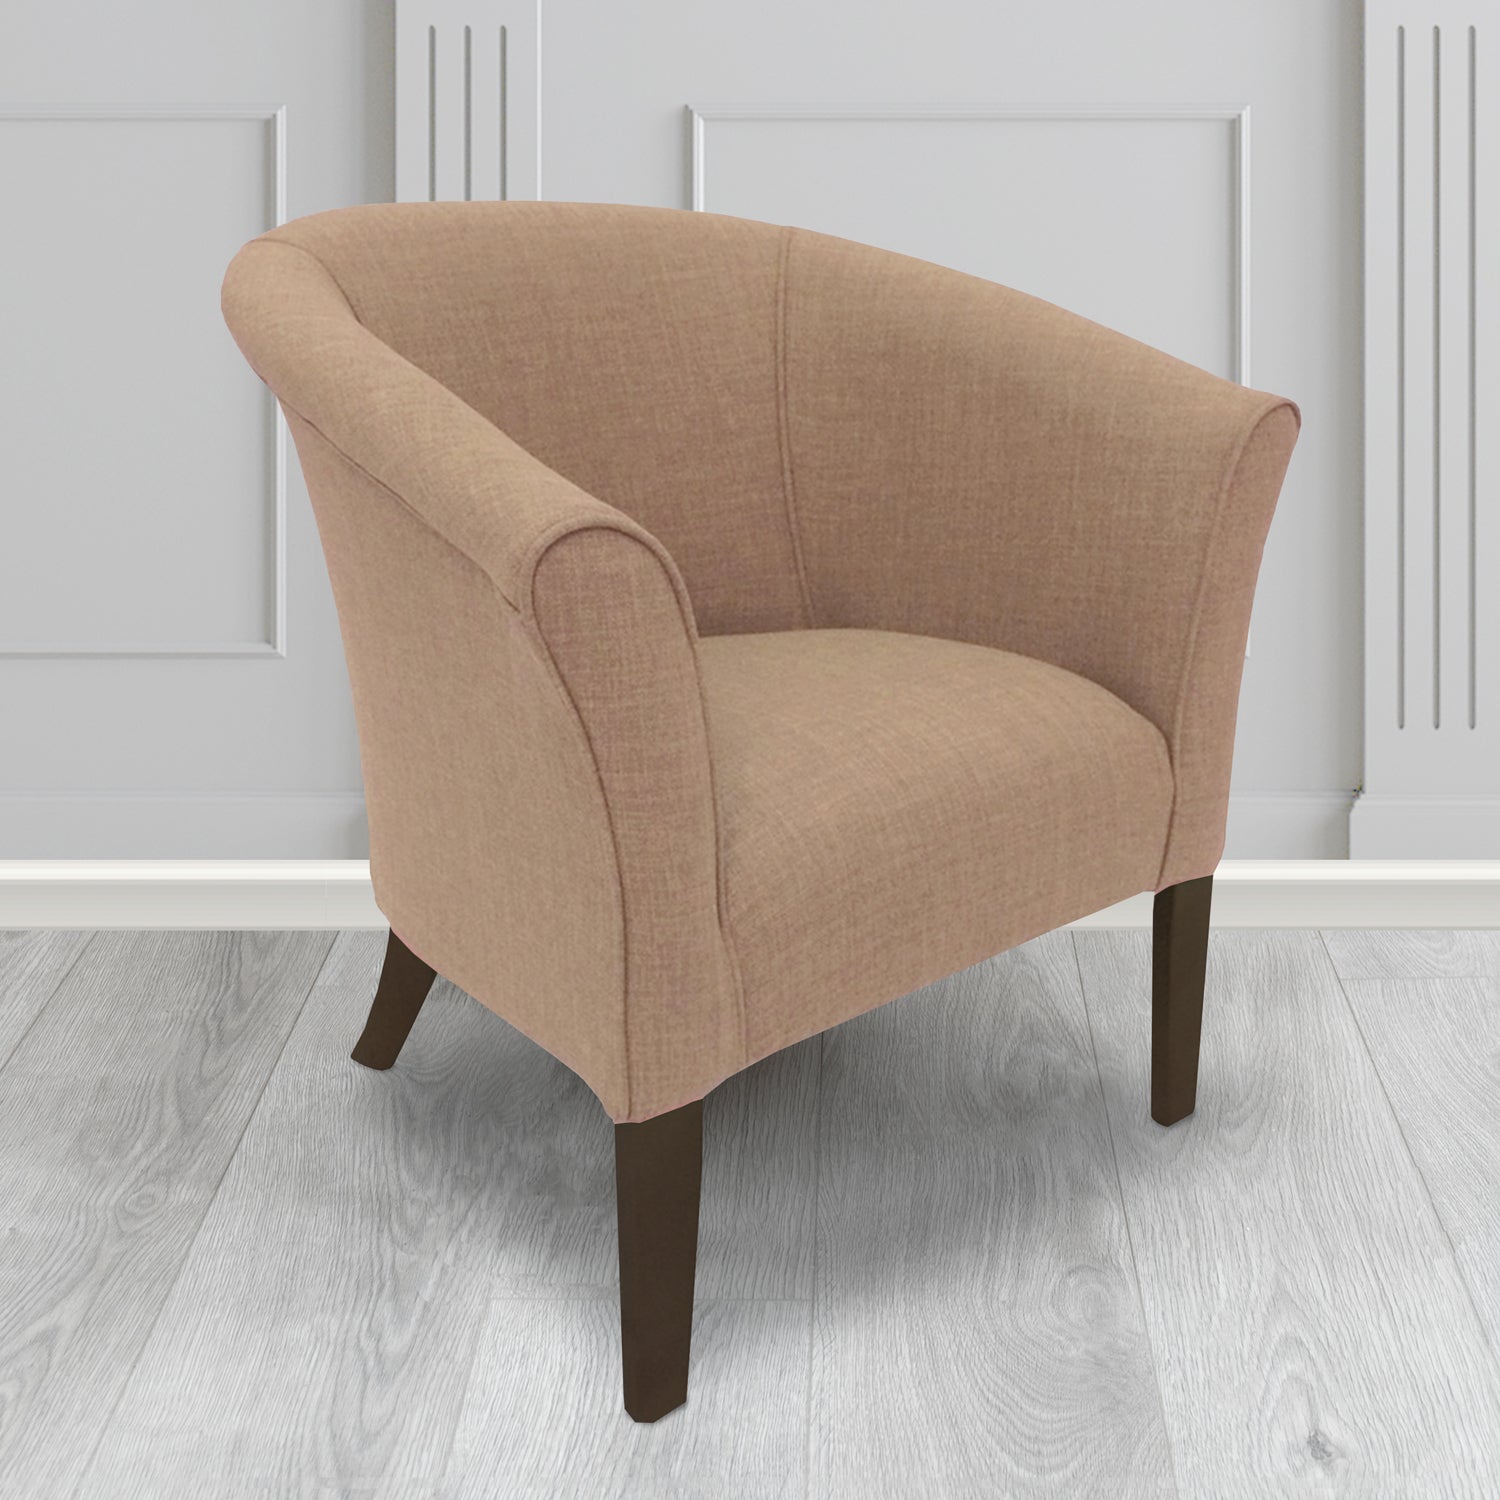 Quill Tub Chair in Linetta Sand Crib 5 Plain Fabric - Antimicrobial, Stain Resistant & Waterproof - The Tub Chair Shop